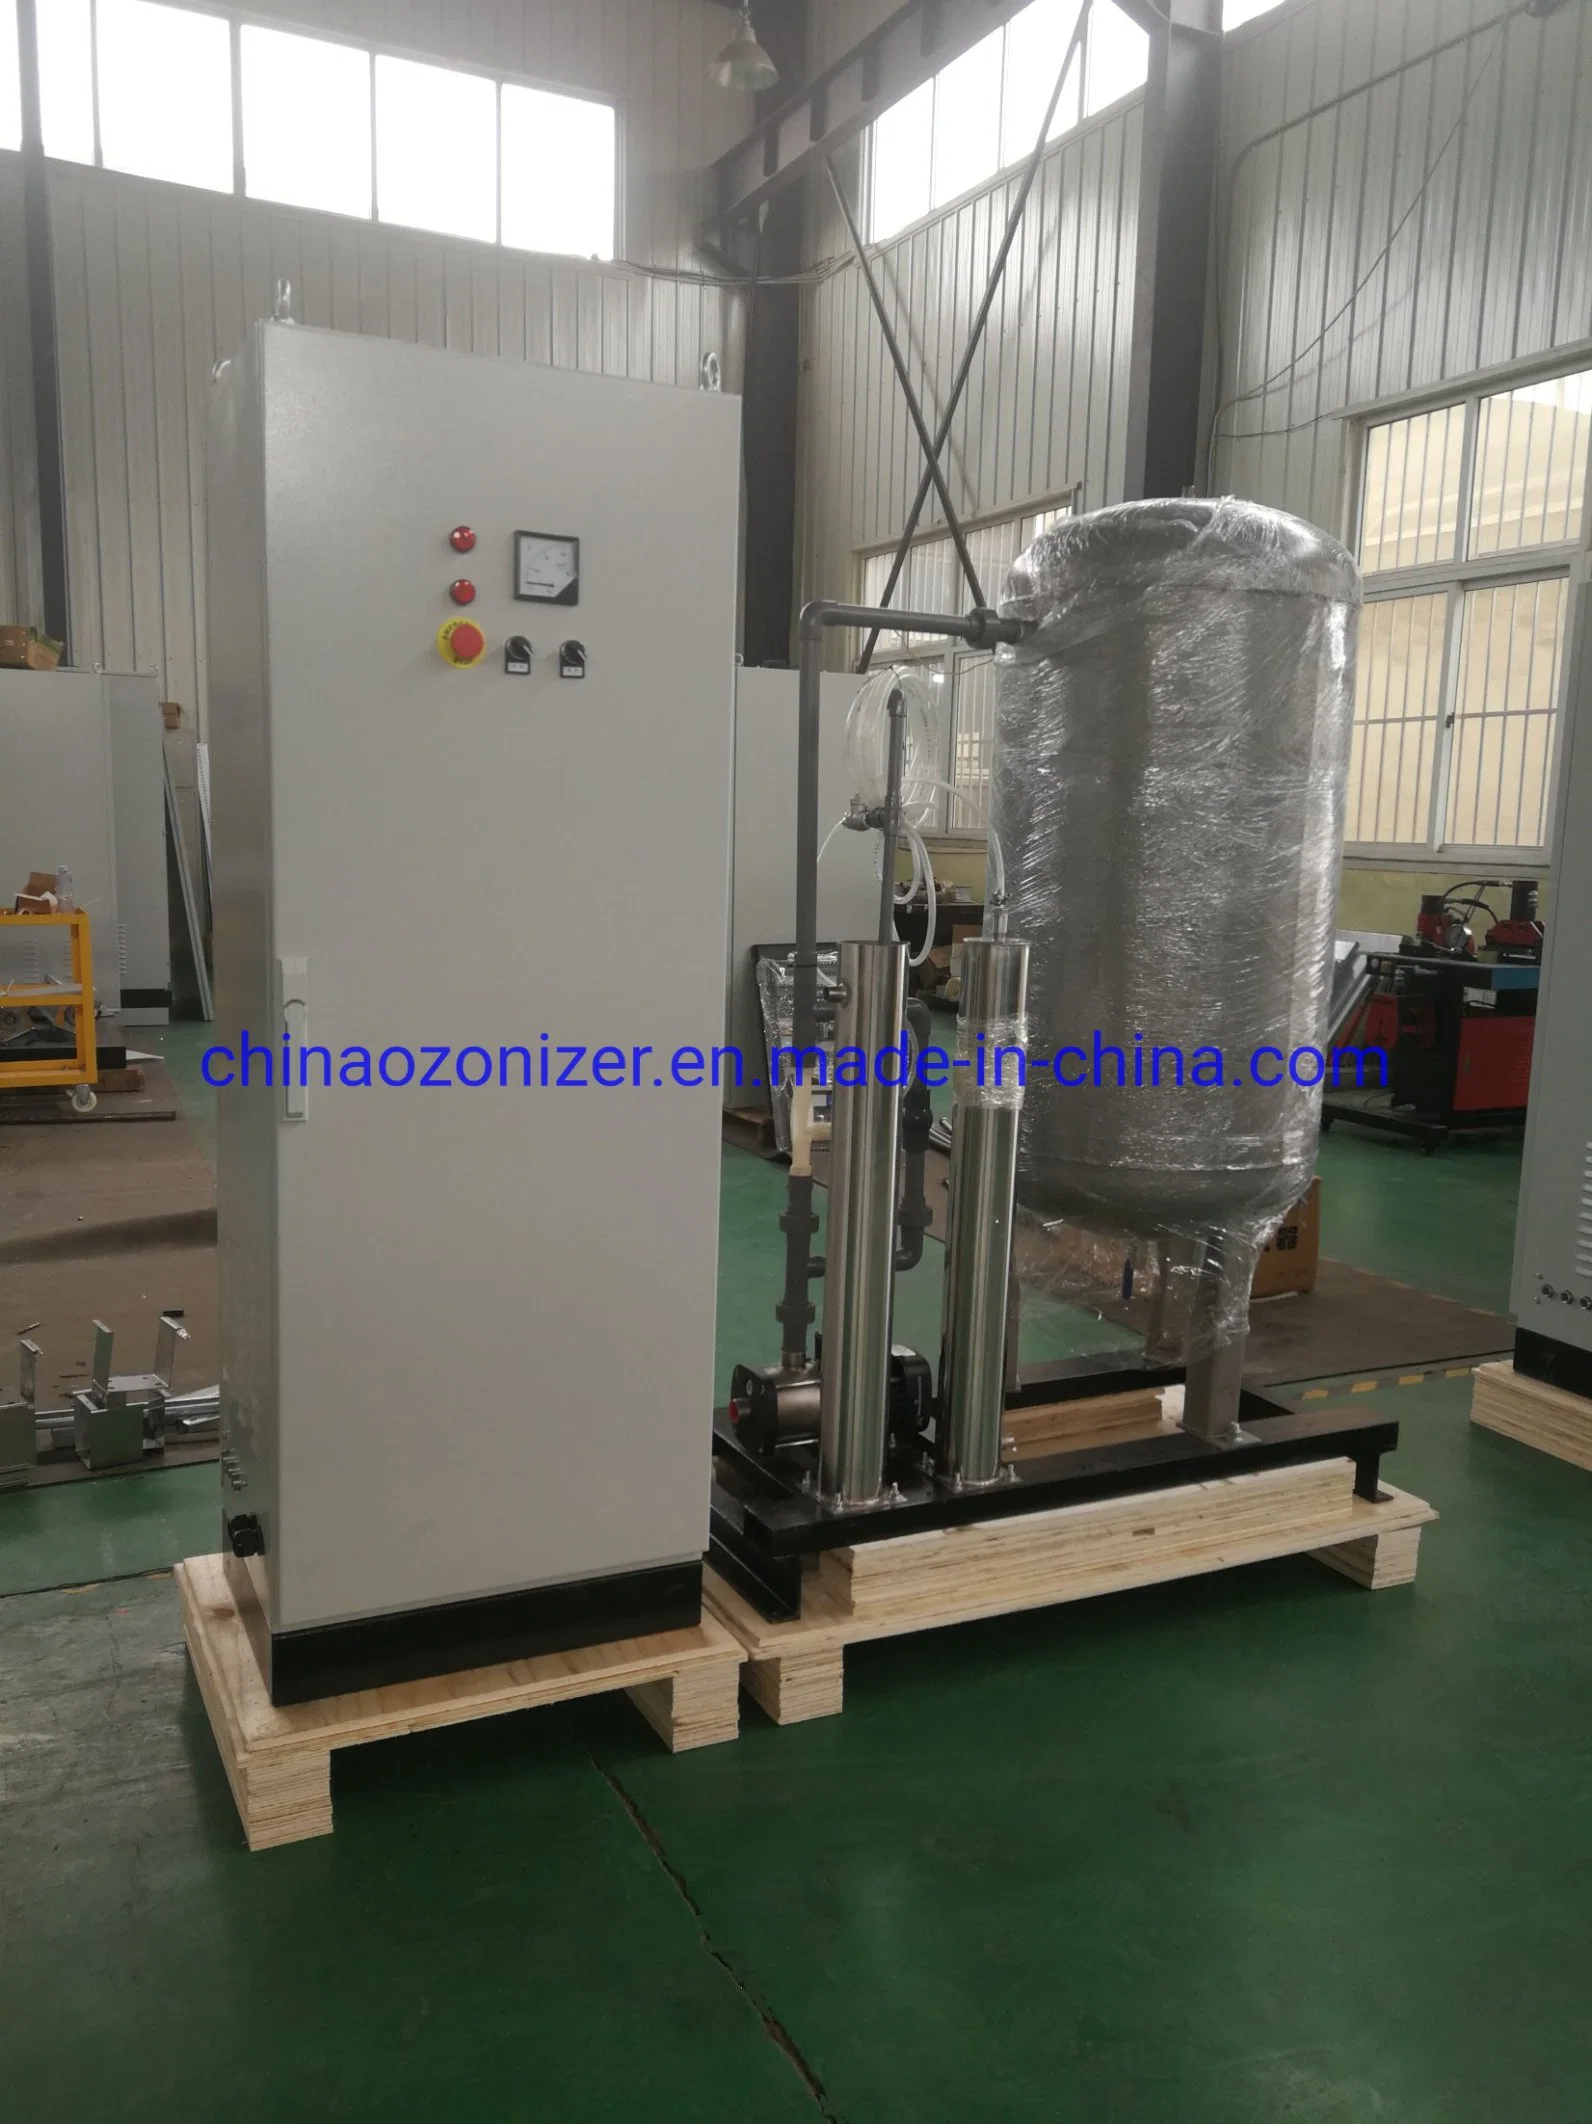 316L Stainless Steel Ozone Generator for Waste Gas Treatment